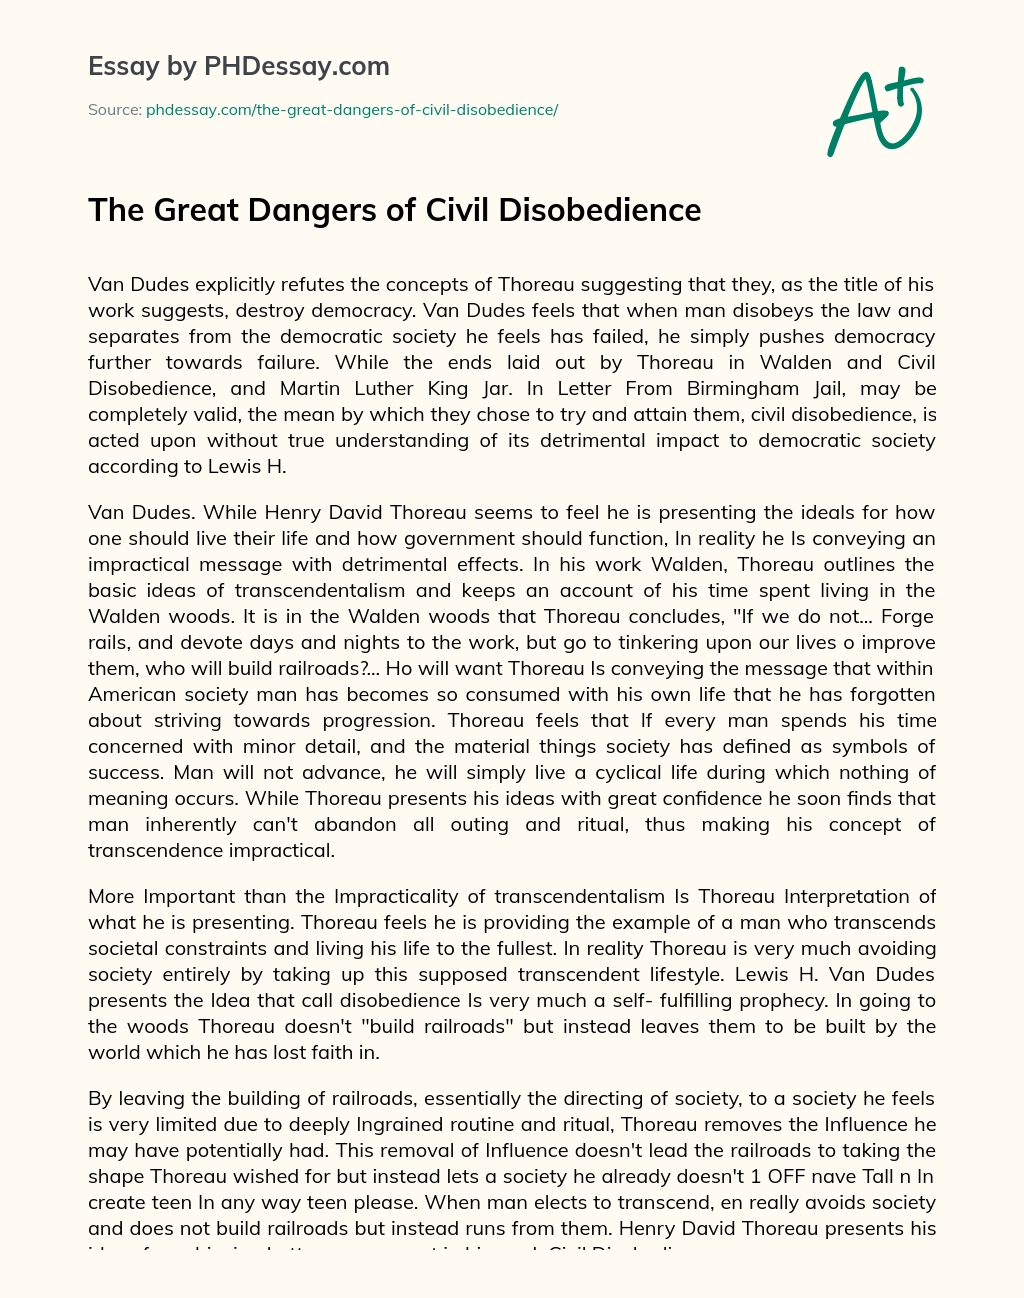 The Great Dangers of Civil Disobedience essay